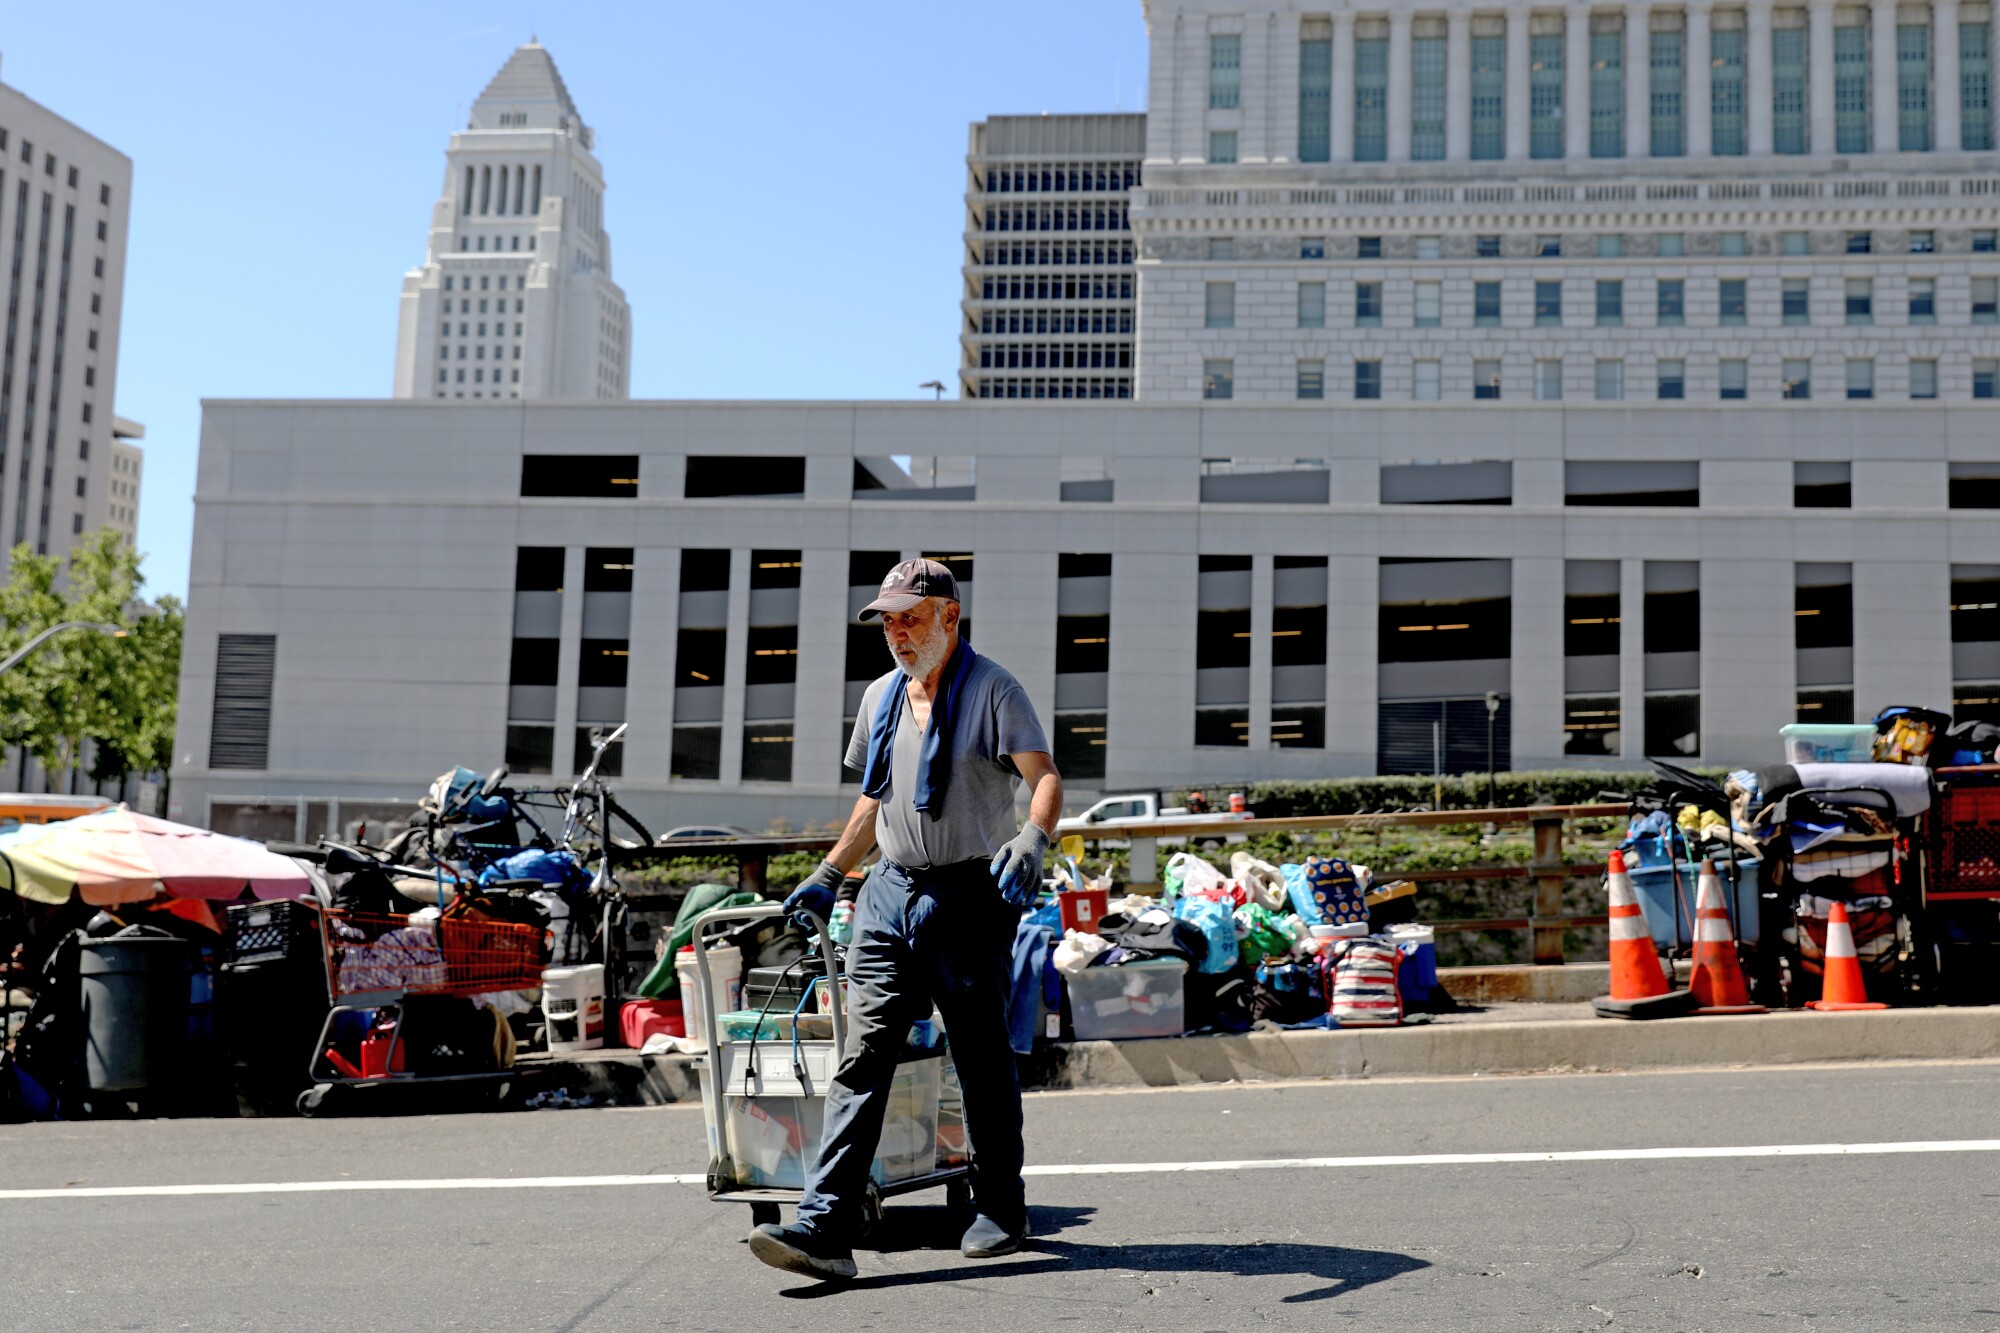 A man crosses the street pulling a handcart, with L.A. City Hall visible in the background.